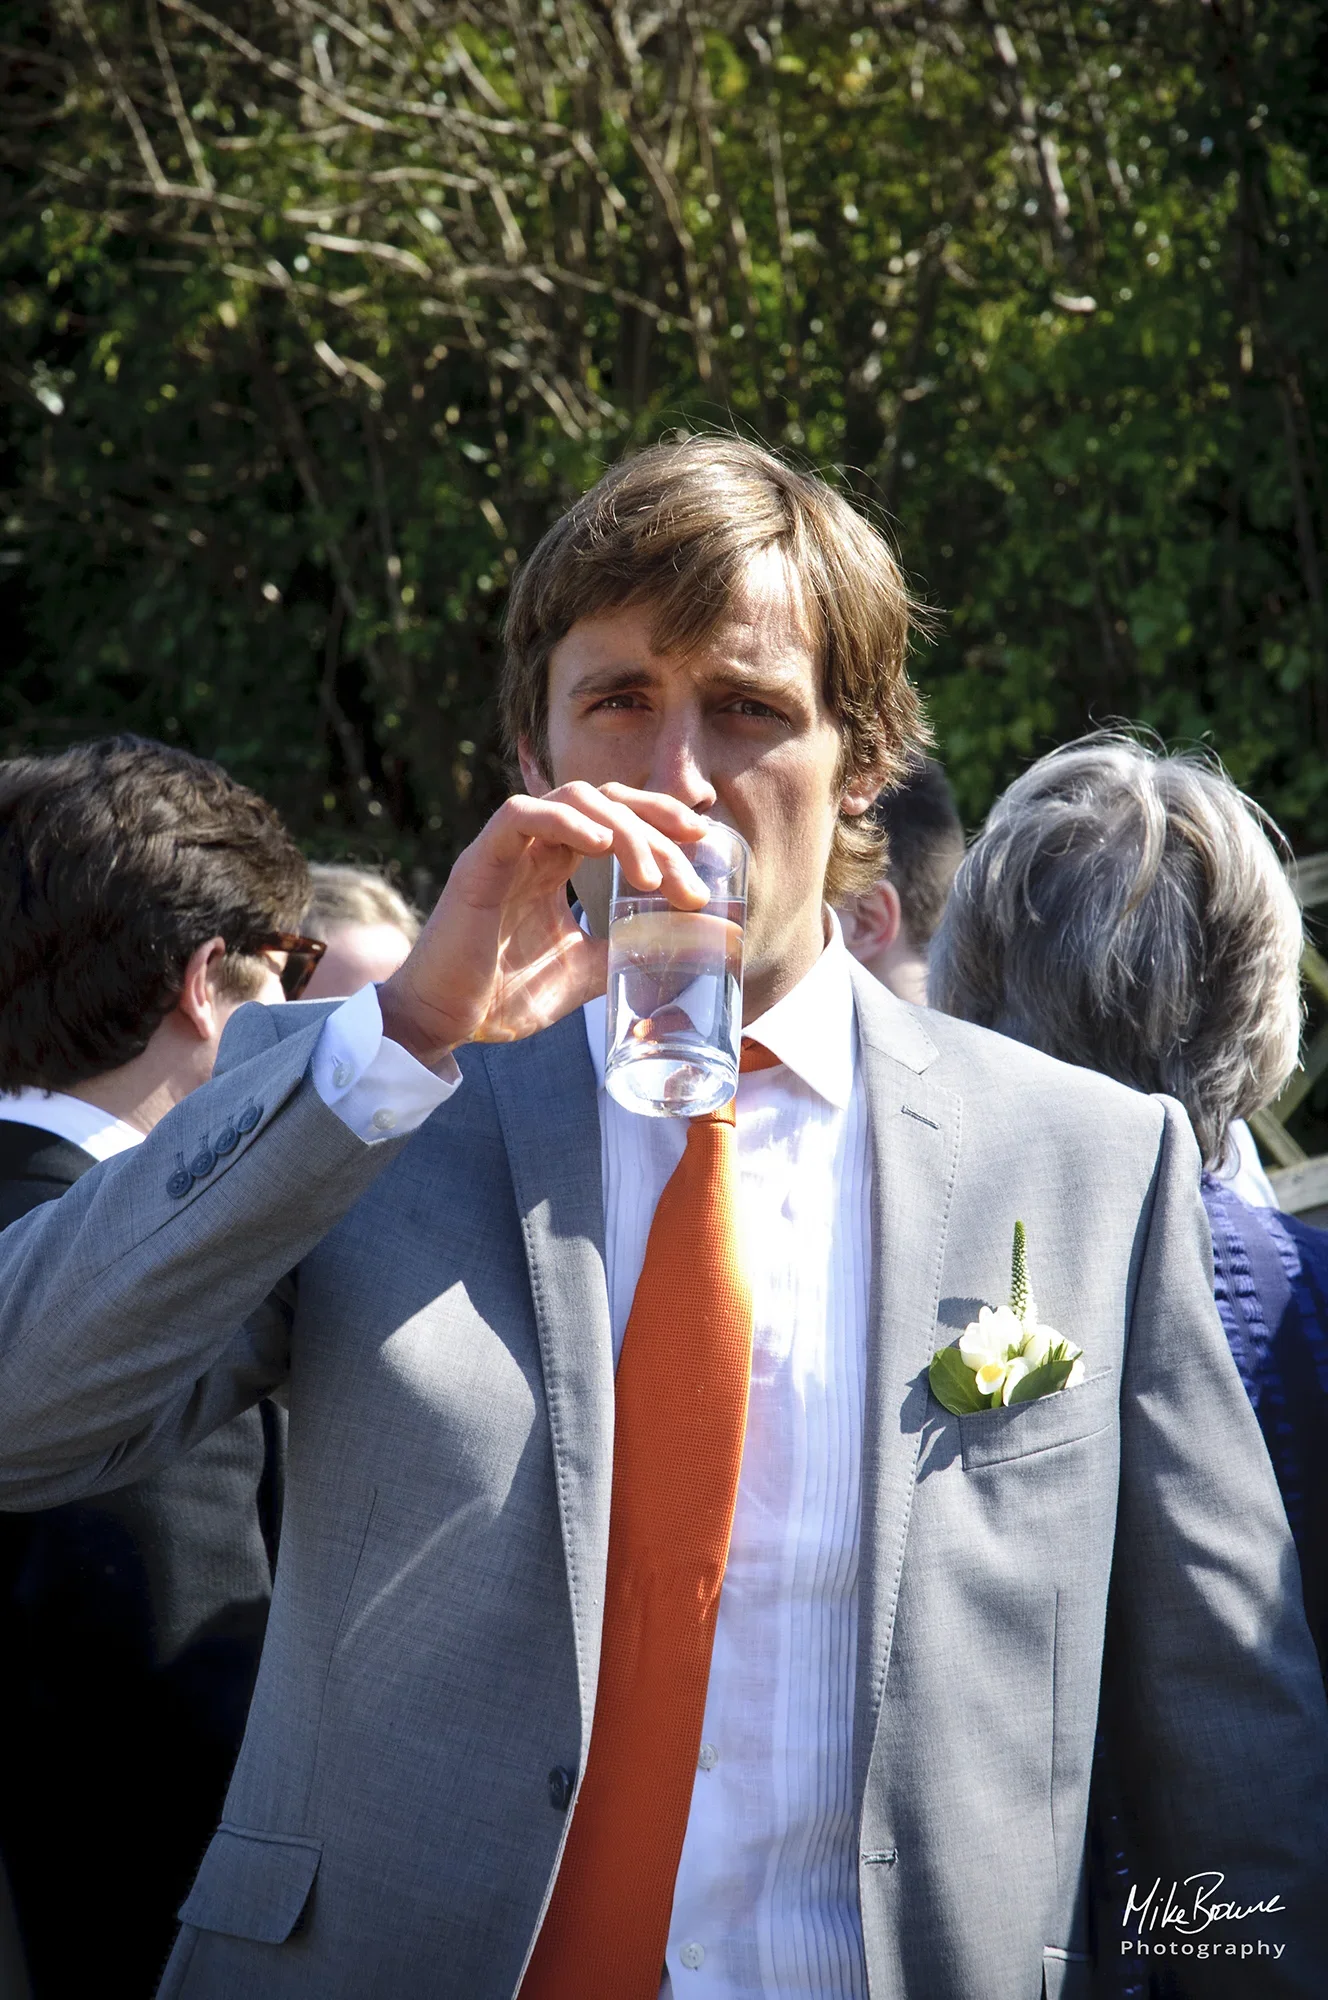 Bridegroom wearing grey suit, orange tie and yellow rose button hole raising a glass to his lips